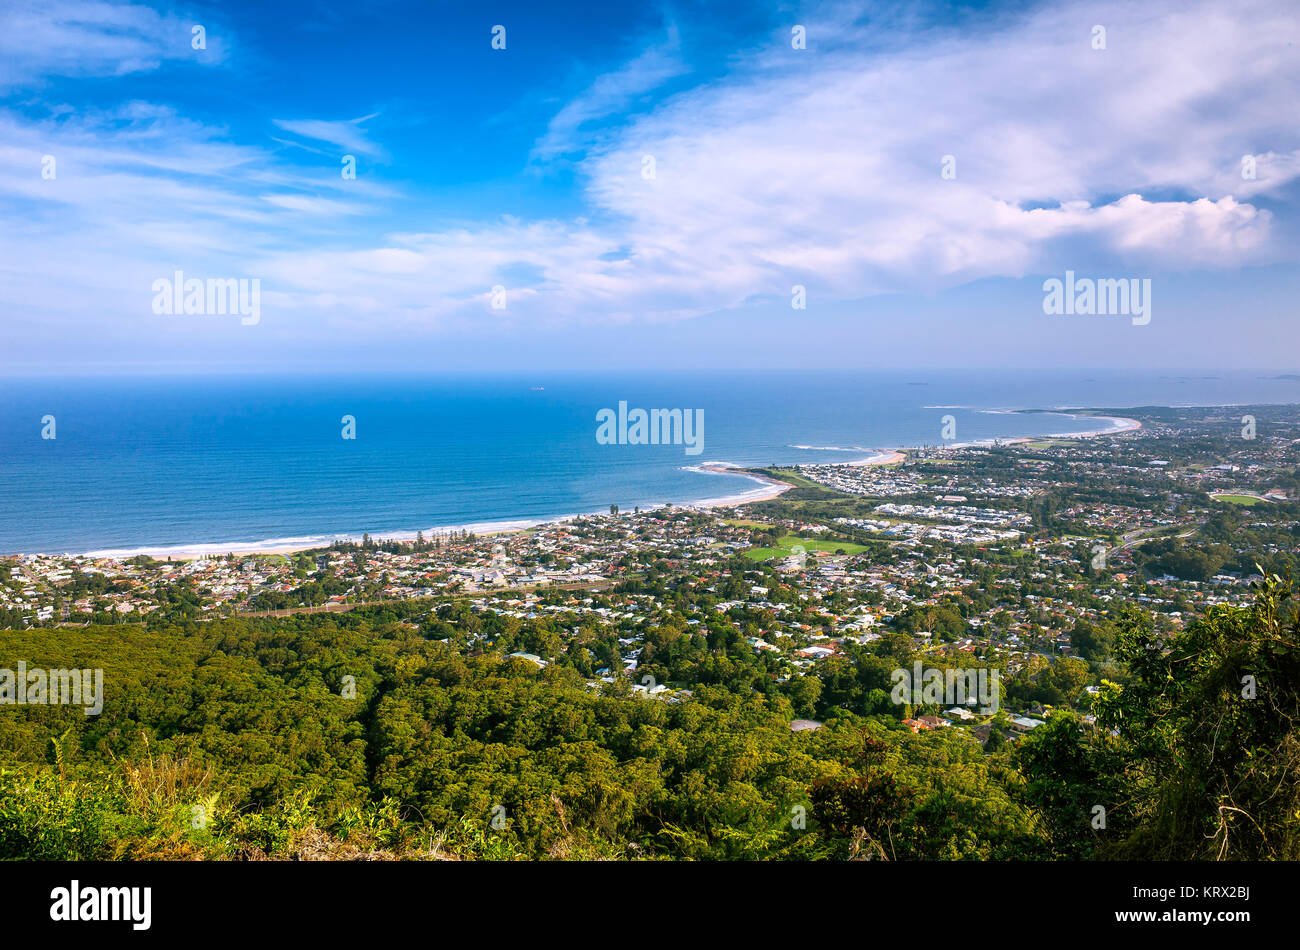 Aerial View of the Coastal City of Wollongong in New South Wales Australia Stock Photo